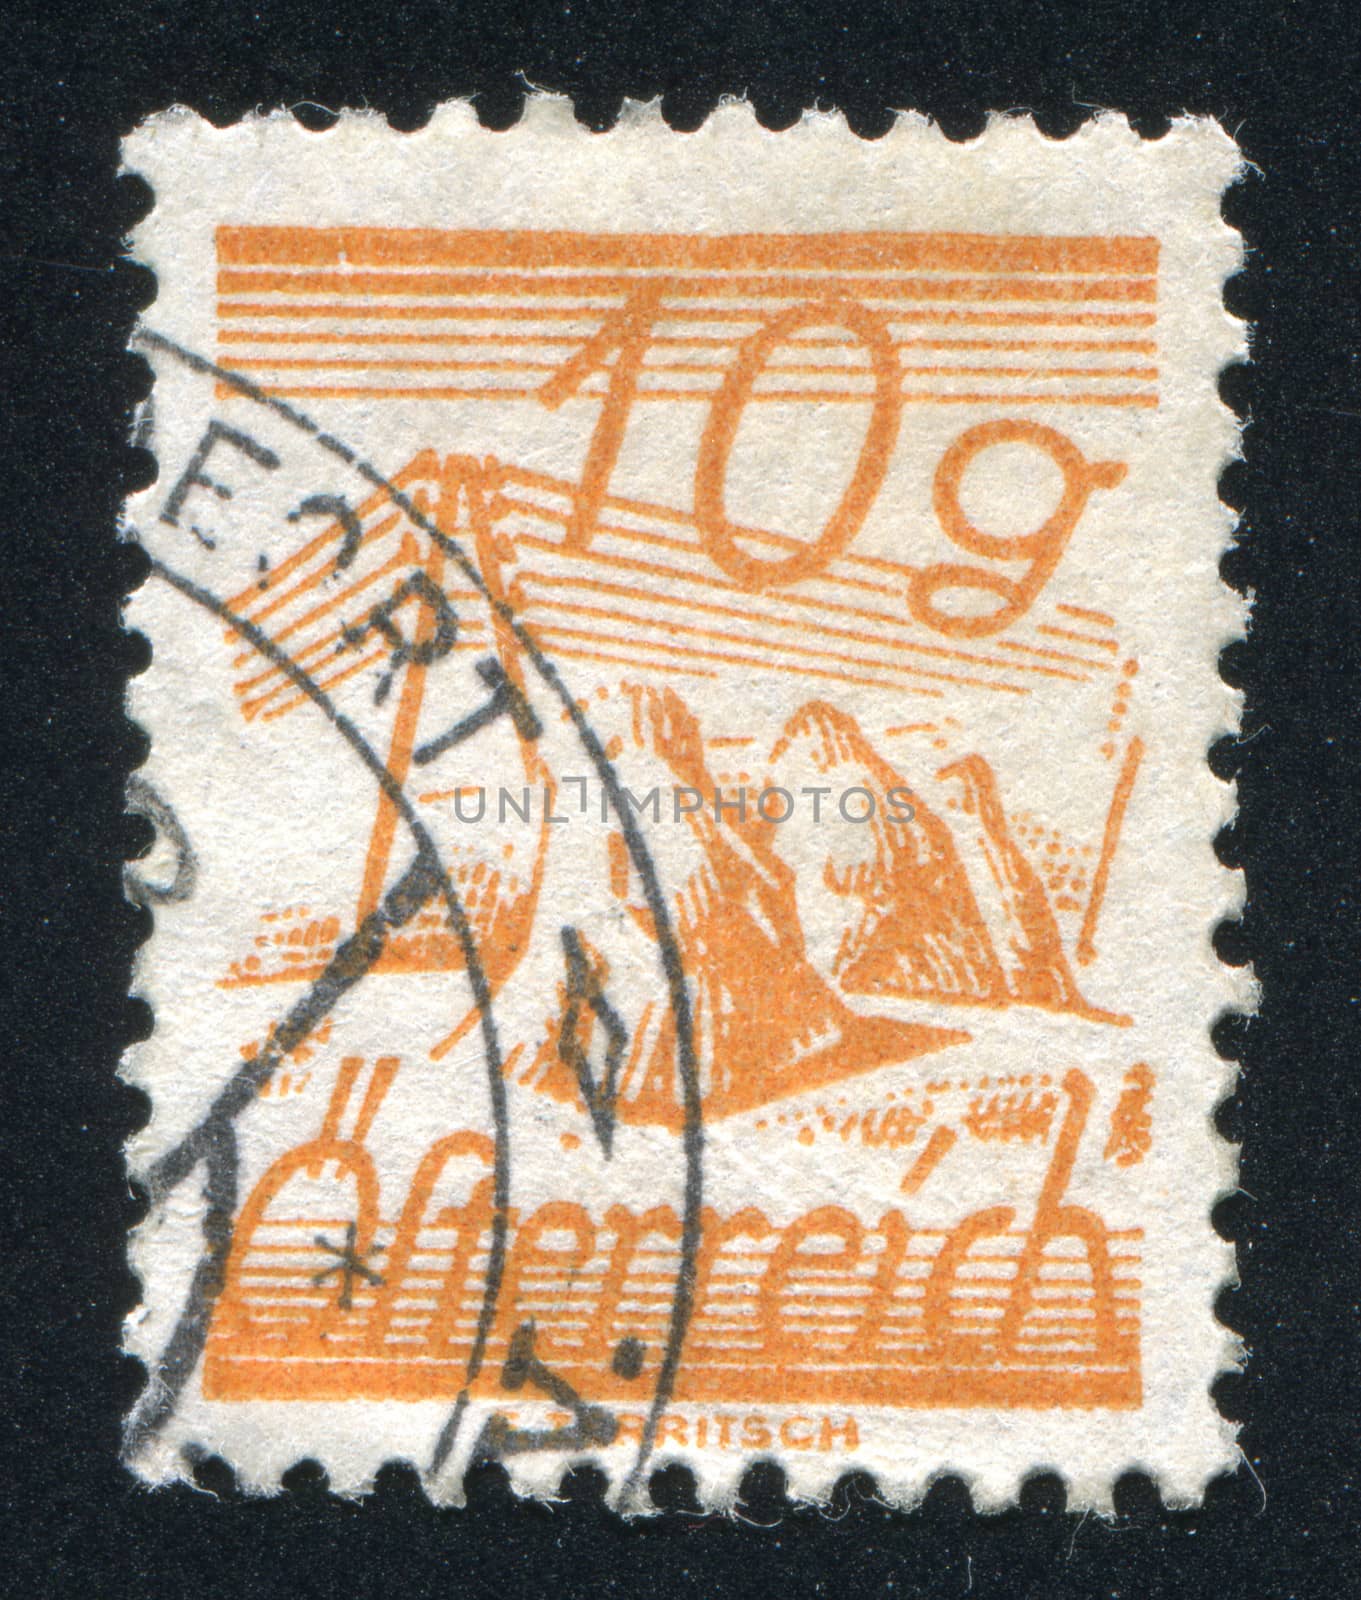 AUSTRIA - CIRCA 1925: stamp printed by Austria, shows Fields Crossed by Telegraph Wires, circa 1925